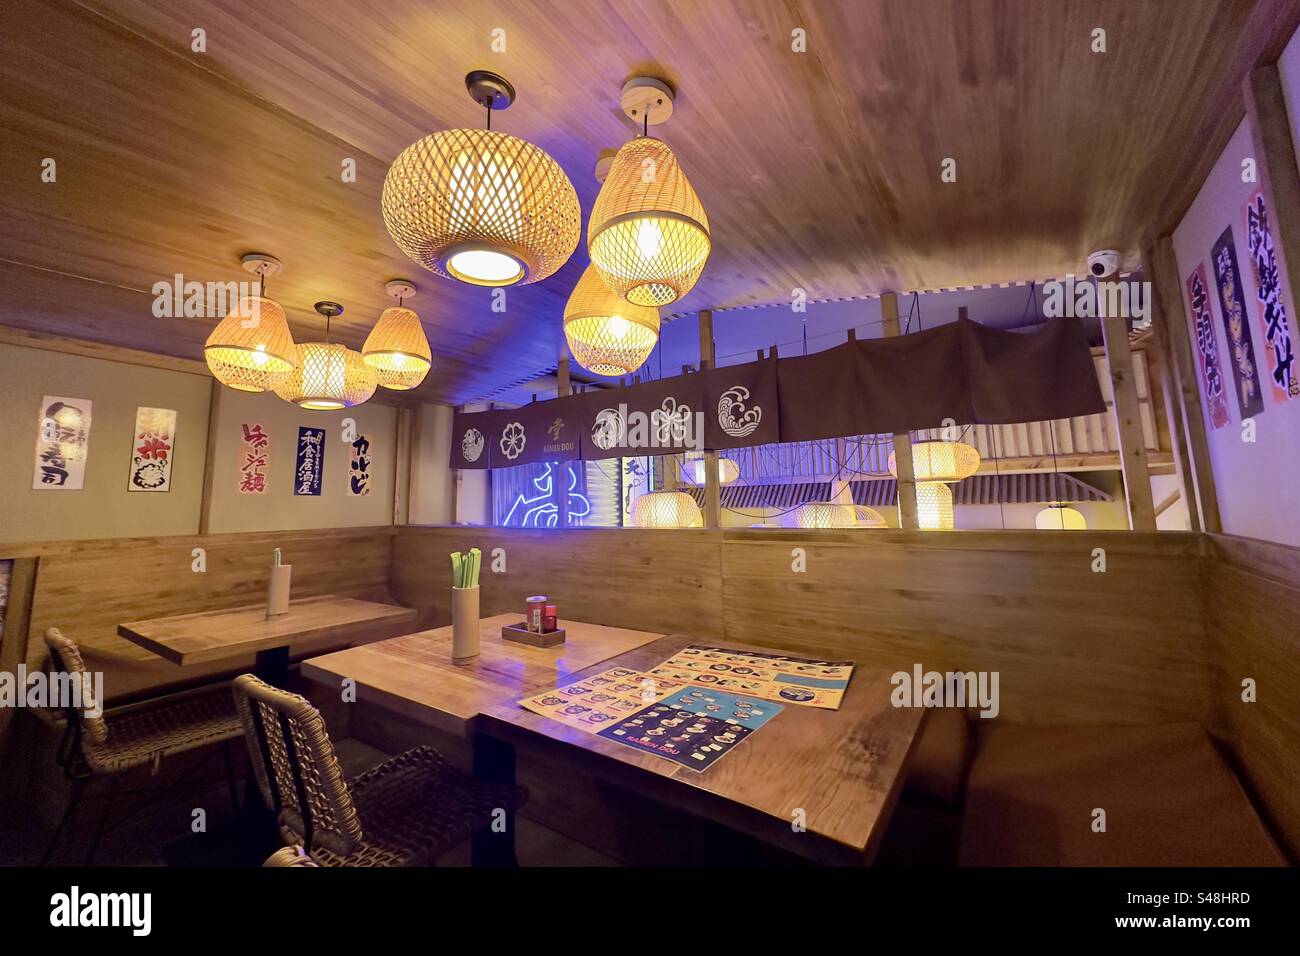 Japanese Chinese Vietnamese restaurant interior with tables, ceiling lights, menus and chairs. Stock Photo